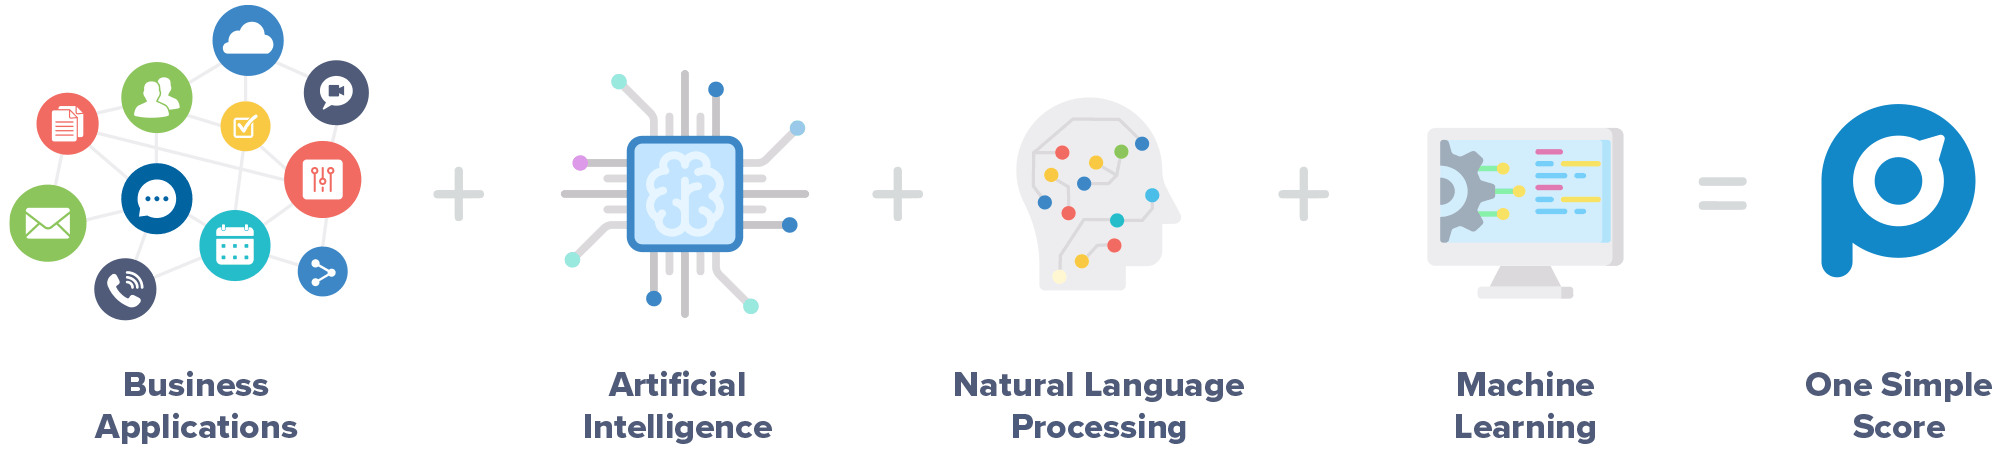 Business applications, artificial intelligence, natural language programming & machine learning to generate one simple score